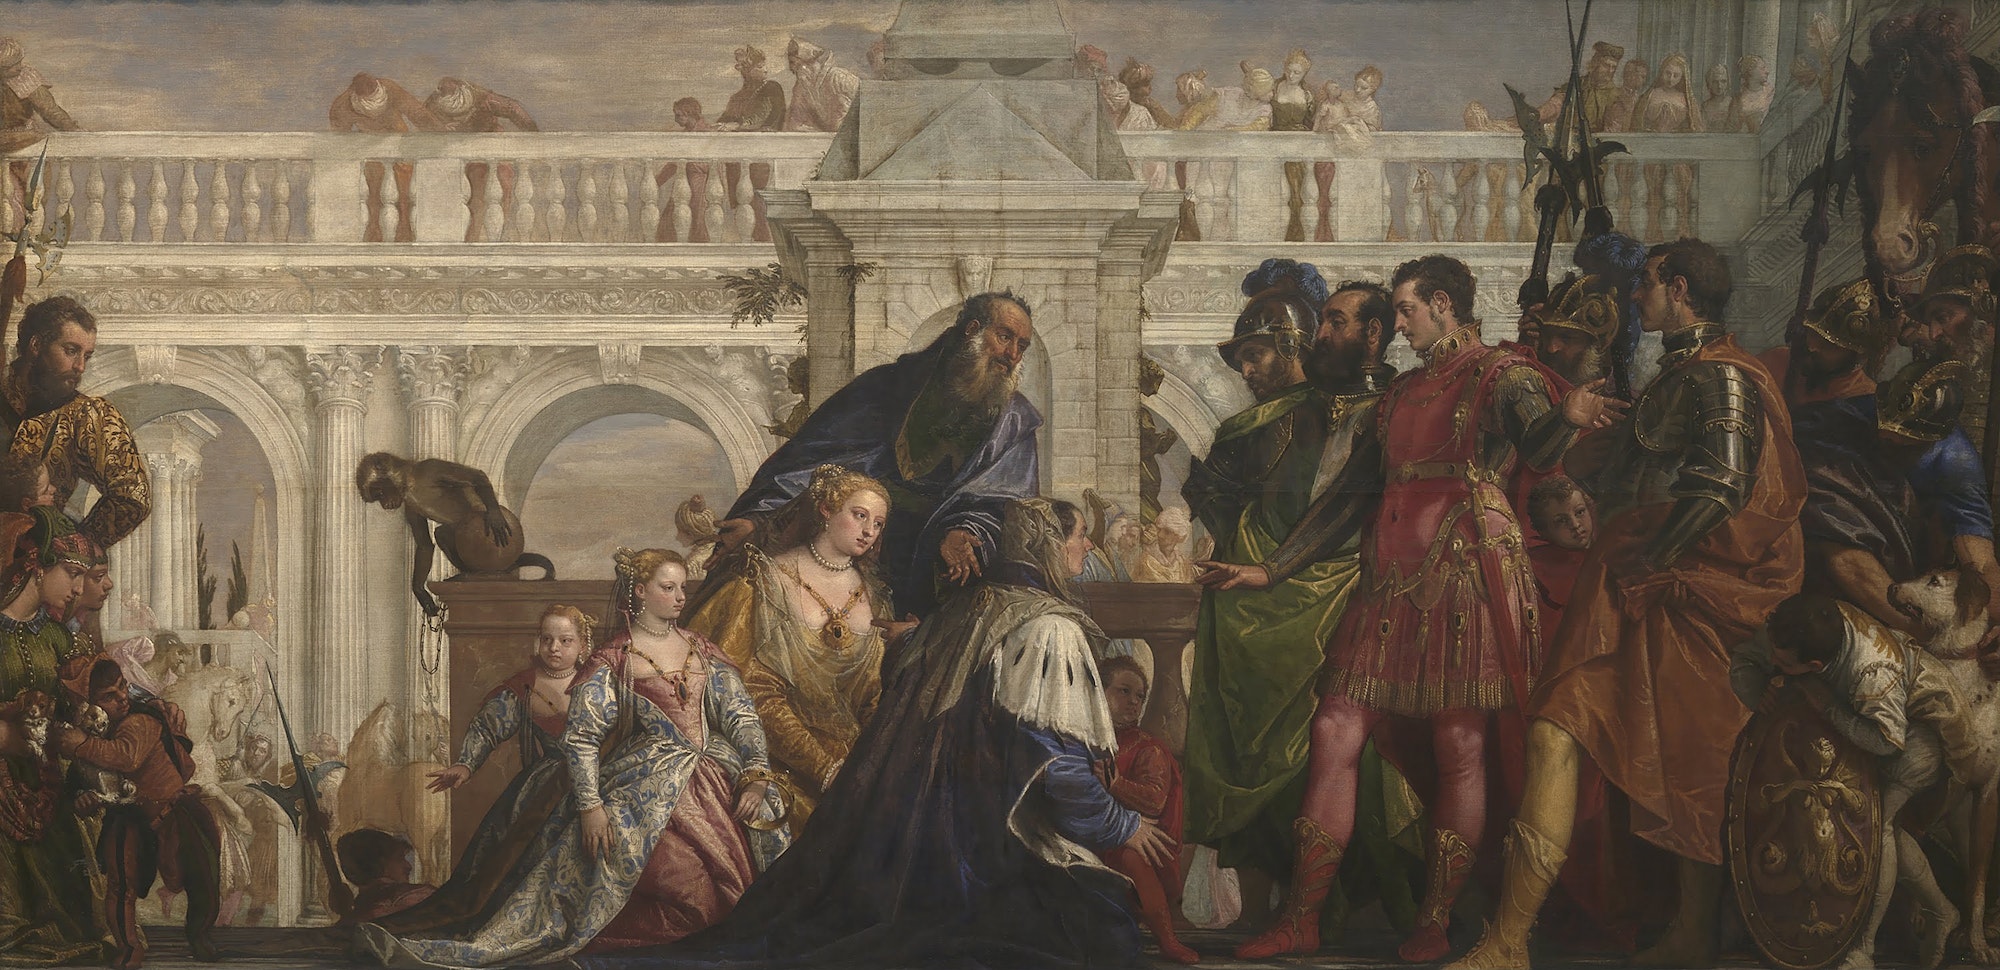 Paolo Veronese The Family of Darius before Alexander 1565-7 (detail), National Gallery, London